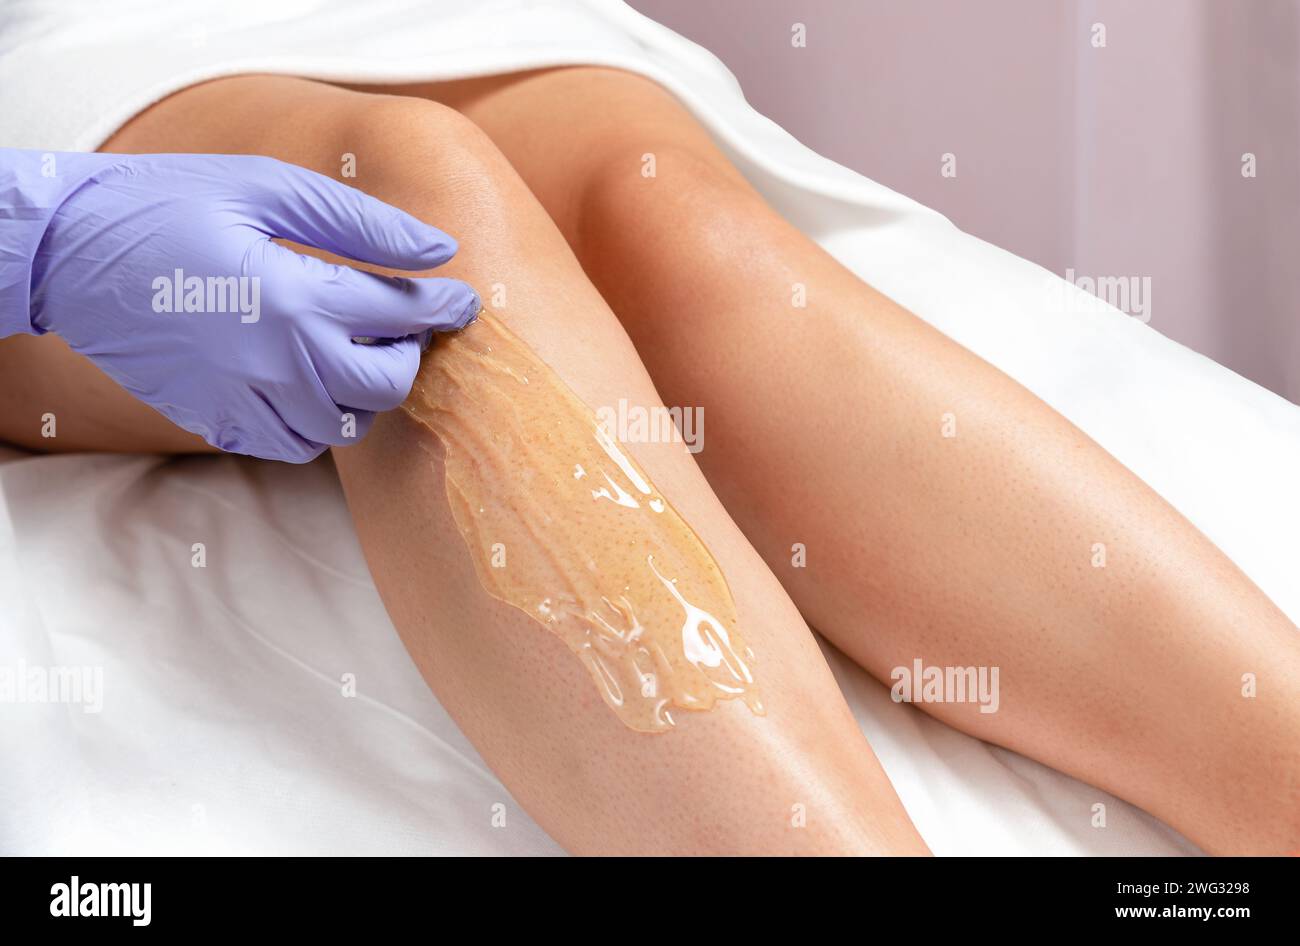 Foot sugaring procedure in a beauty salon. A gloved master applies sugar paste on a woman's leg for depilation. Stock Photo